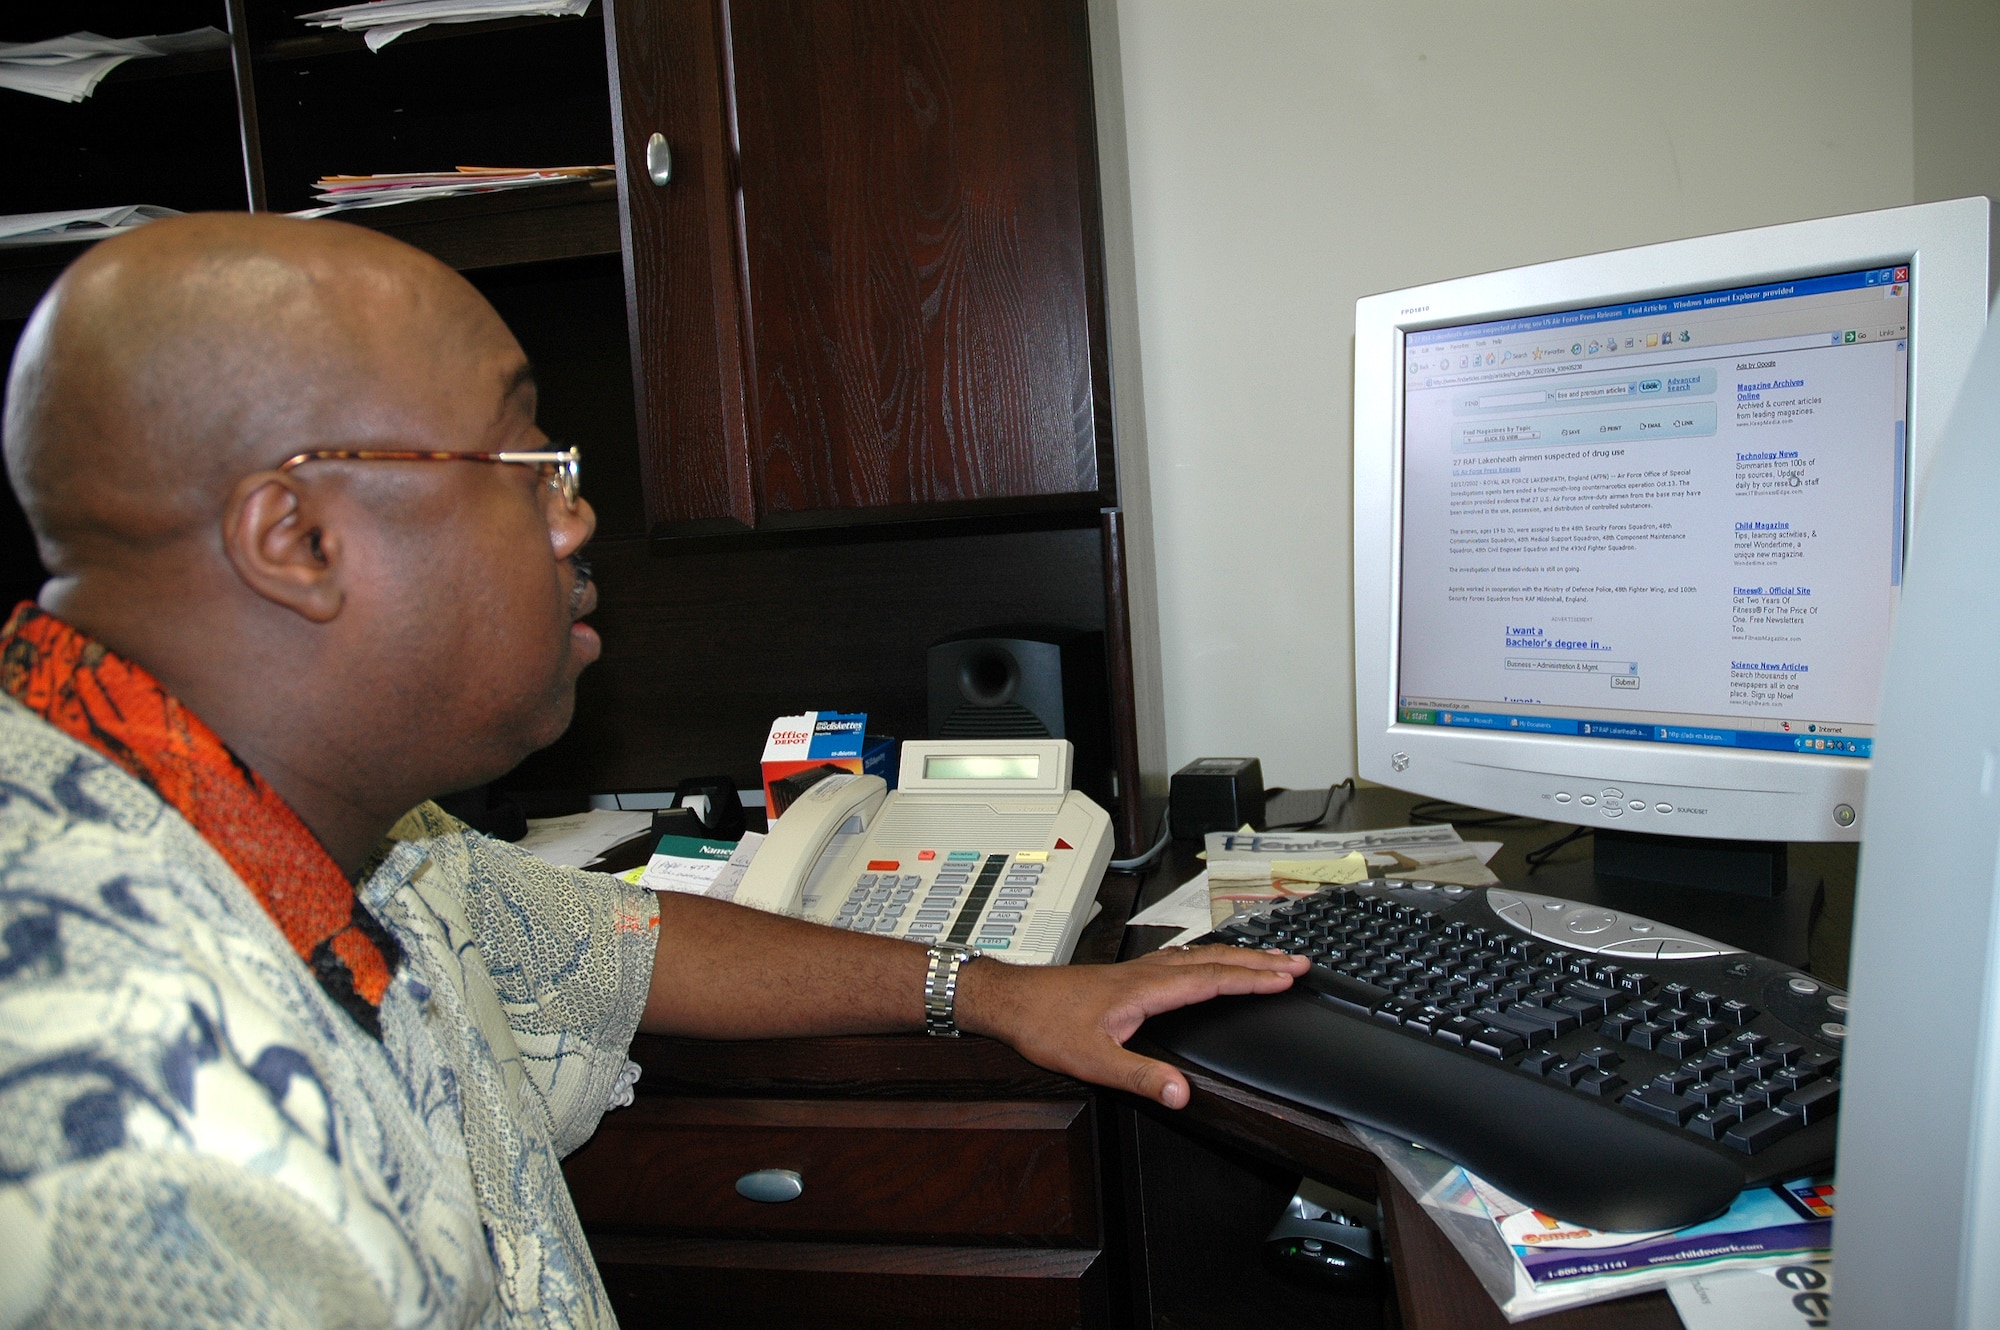 PATRICK AFB, Fla. -- Andre Johnson, 45th Space Wing Drug Demand Reduction Program manager, researches past Red Ribbon Week campaigns as he finalizes plans for the 2006 Red Ribbon Week, Oct. 23- 31. The theme is “United Against Drugs.” Mr. Johnson will speak with children at the Youth Center at Patrick AFB as well as two schools and a church. (U.S. Air Force photo by Staff Sgt. Patrick Brown)